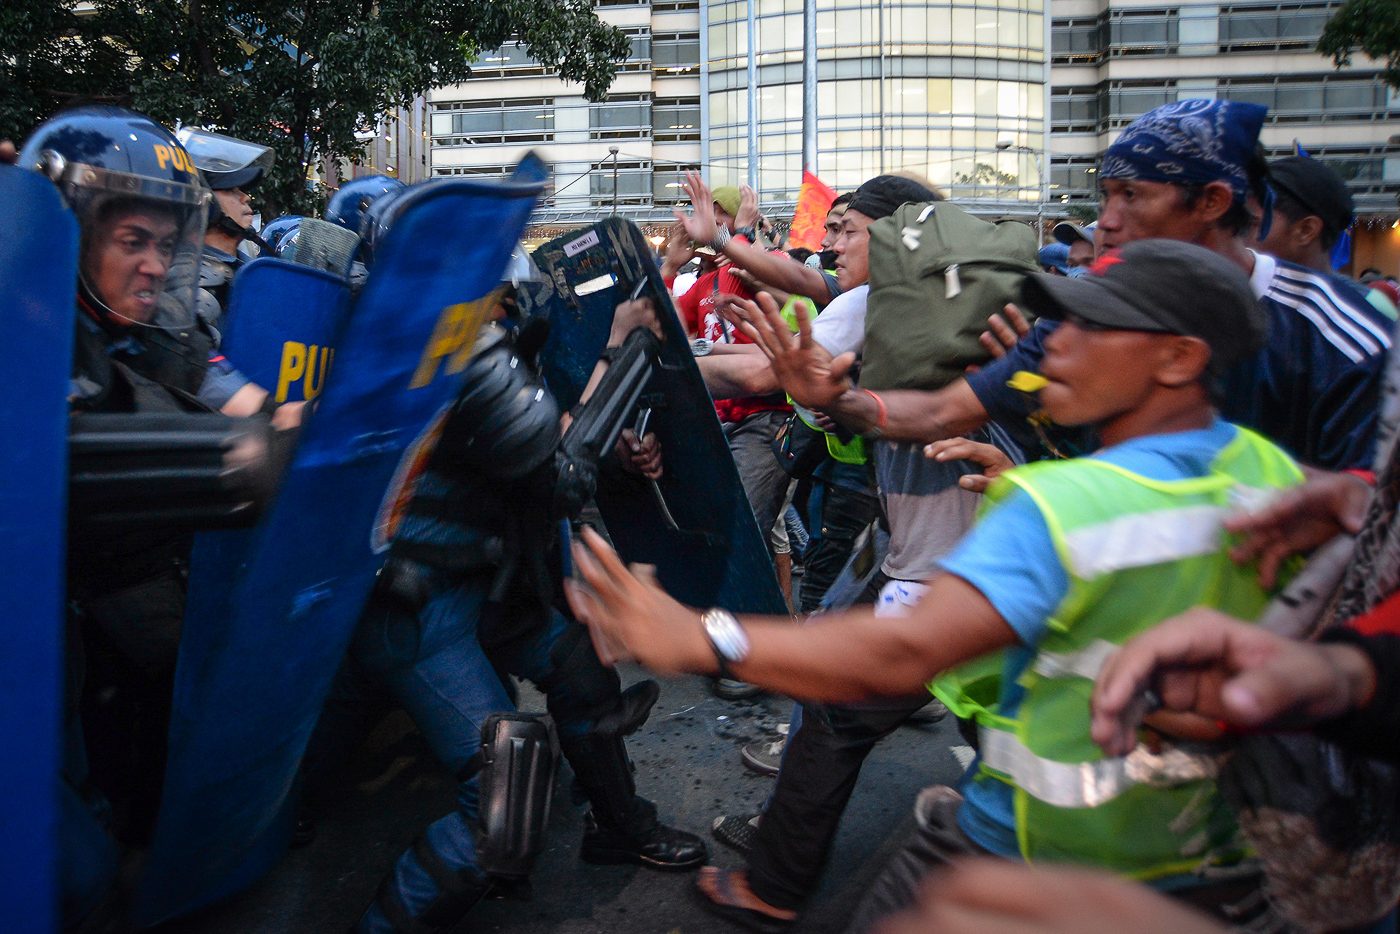 READY, SET, CLASH. Militant workers from the Southern Tagalog region clash with anti-riot police during a rally in front of the US Embassy in Manila on July 22, 2017. Photo by Maria Tan/Rappler  